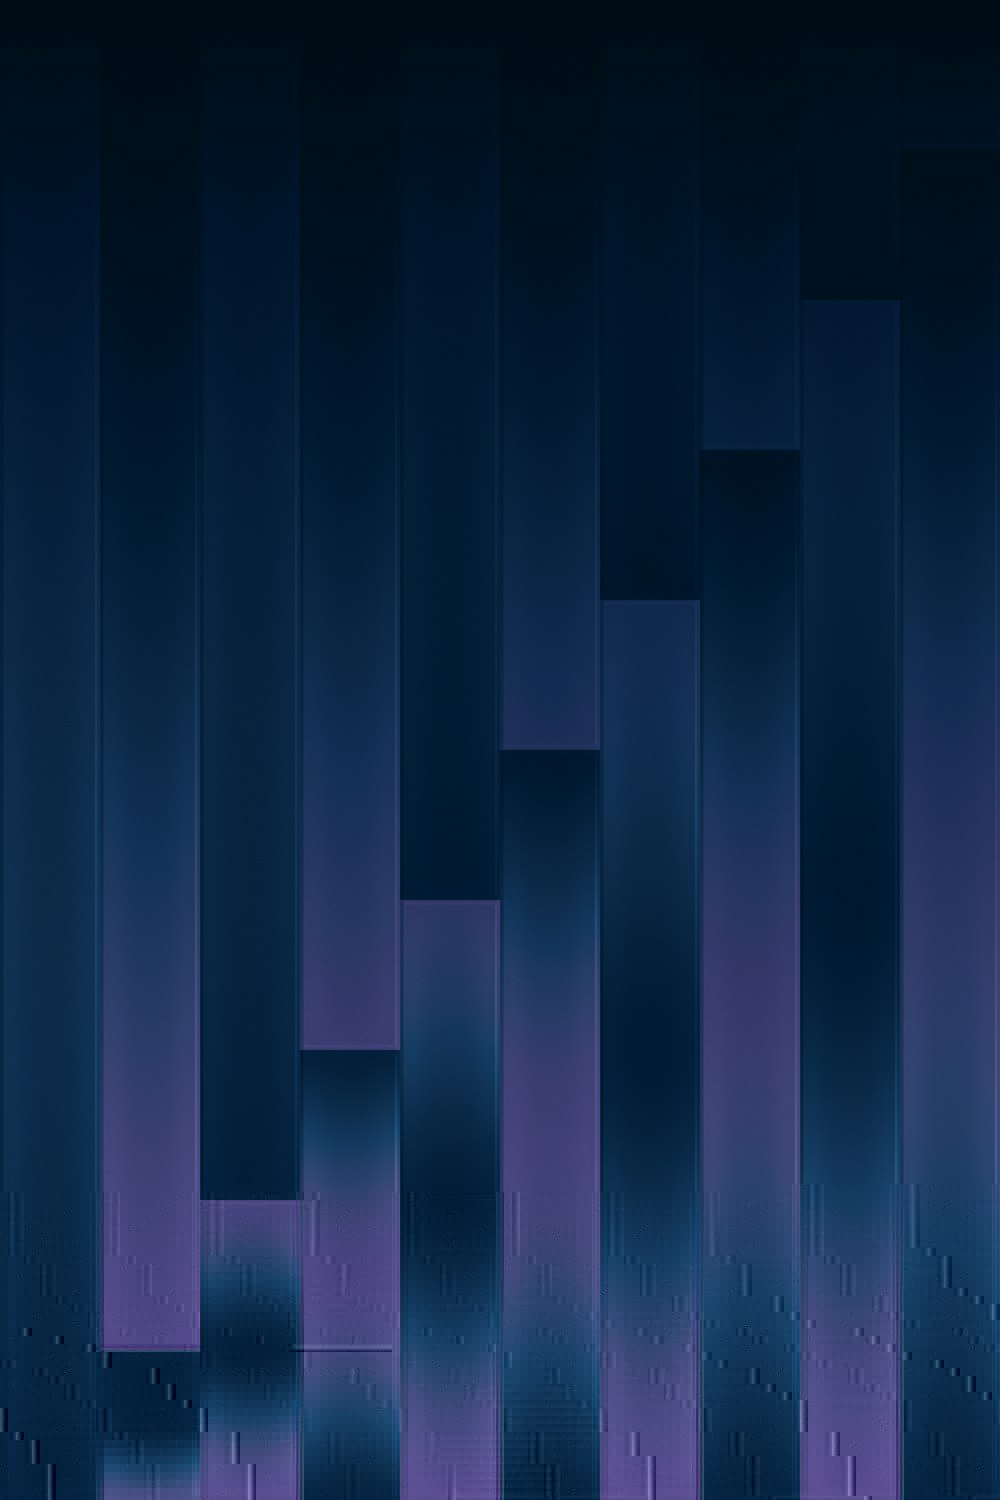 a dark blue background with vertical lines